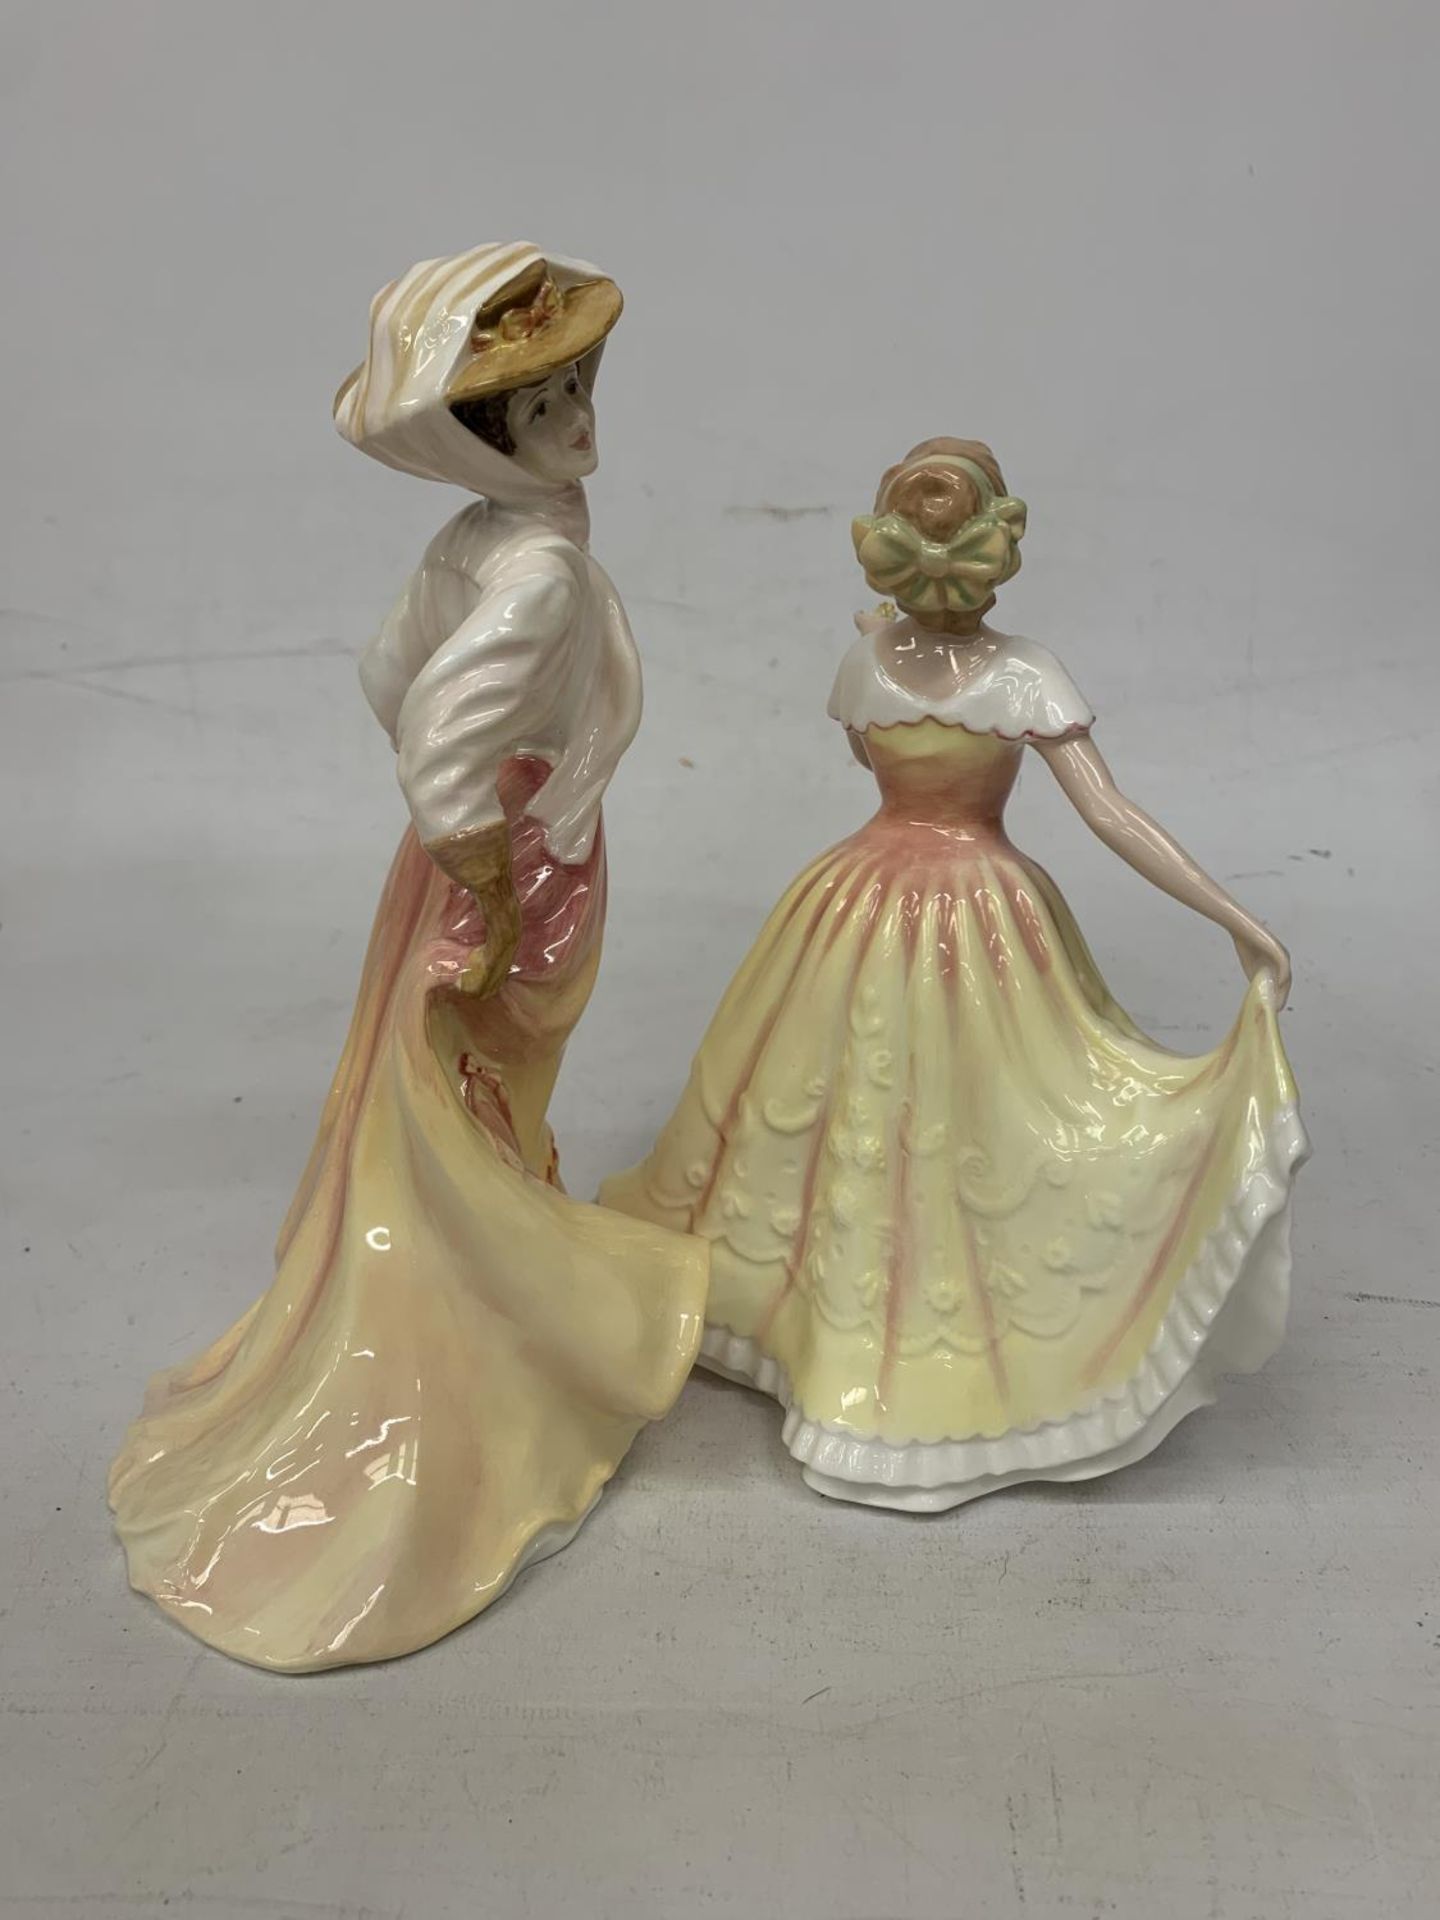 TWO ROYAL DOULTON FIGURES "THE OPEN ROAD" HN 4161 AND FIGURE OF THE YEAR " DEBORAH" HN 3644 - Bild 2 aus 4